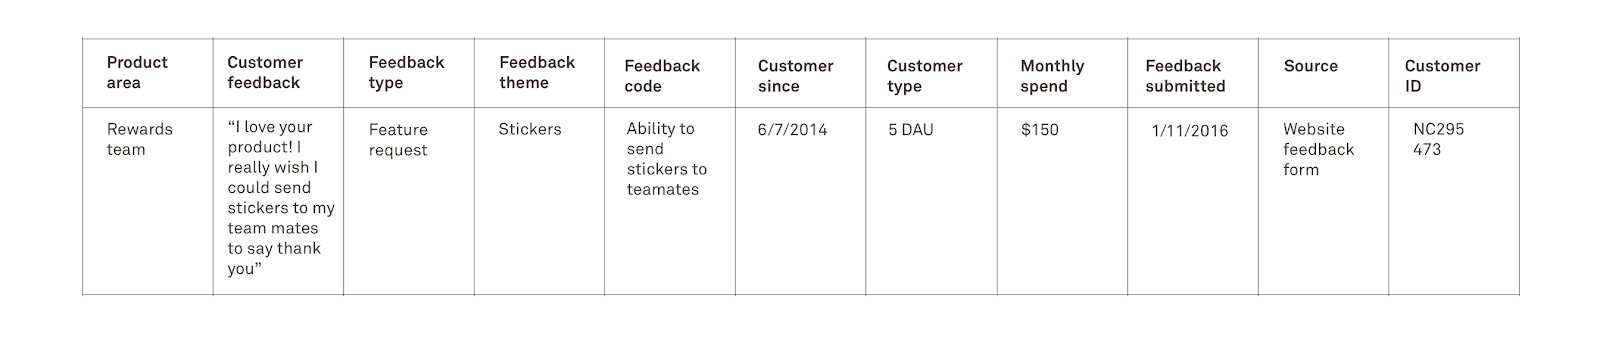 Collate your feedback data